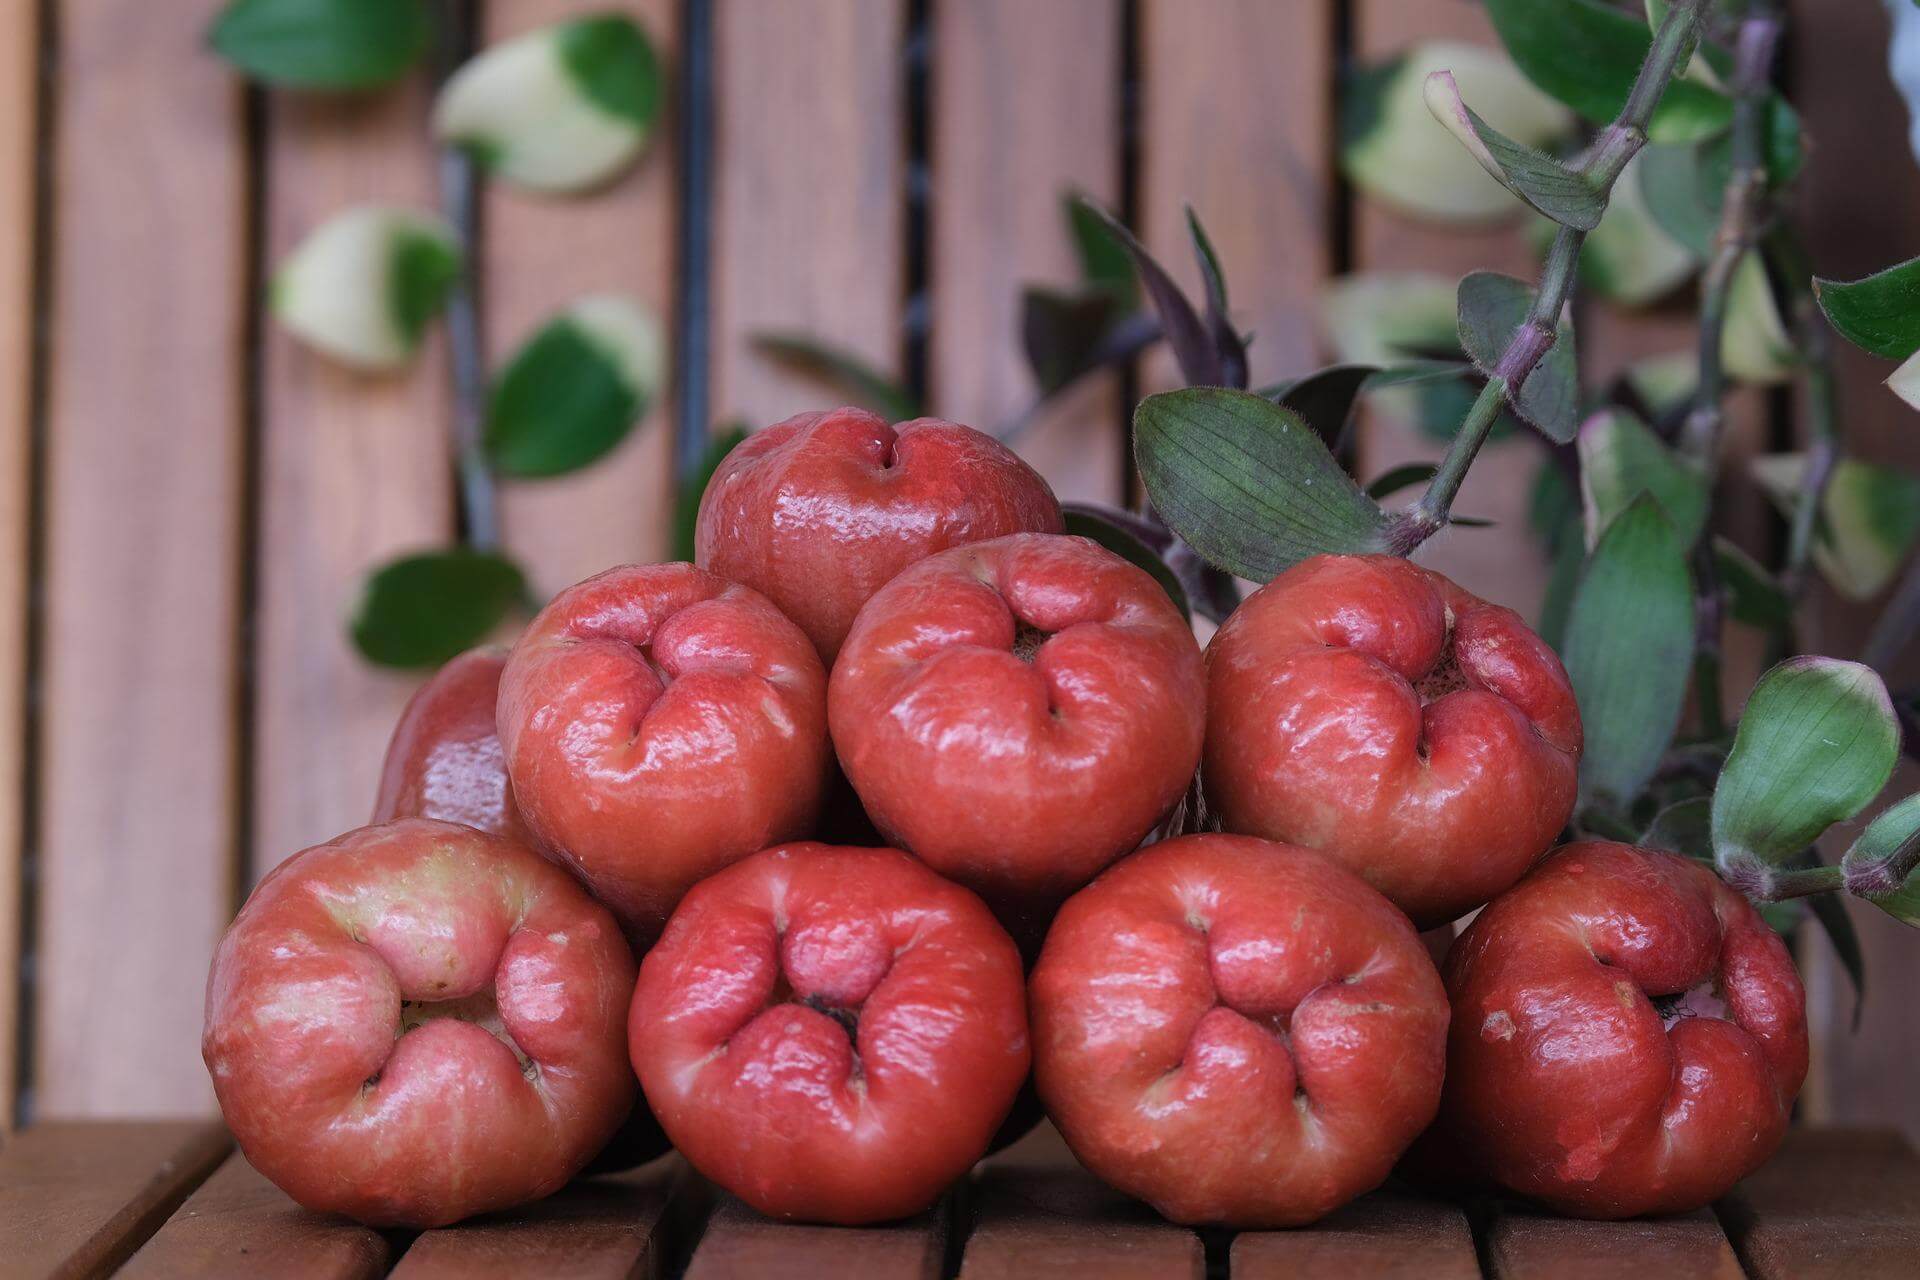 Water Apple | Wax Apple: Ayurvedic And Therapeutic Benefits